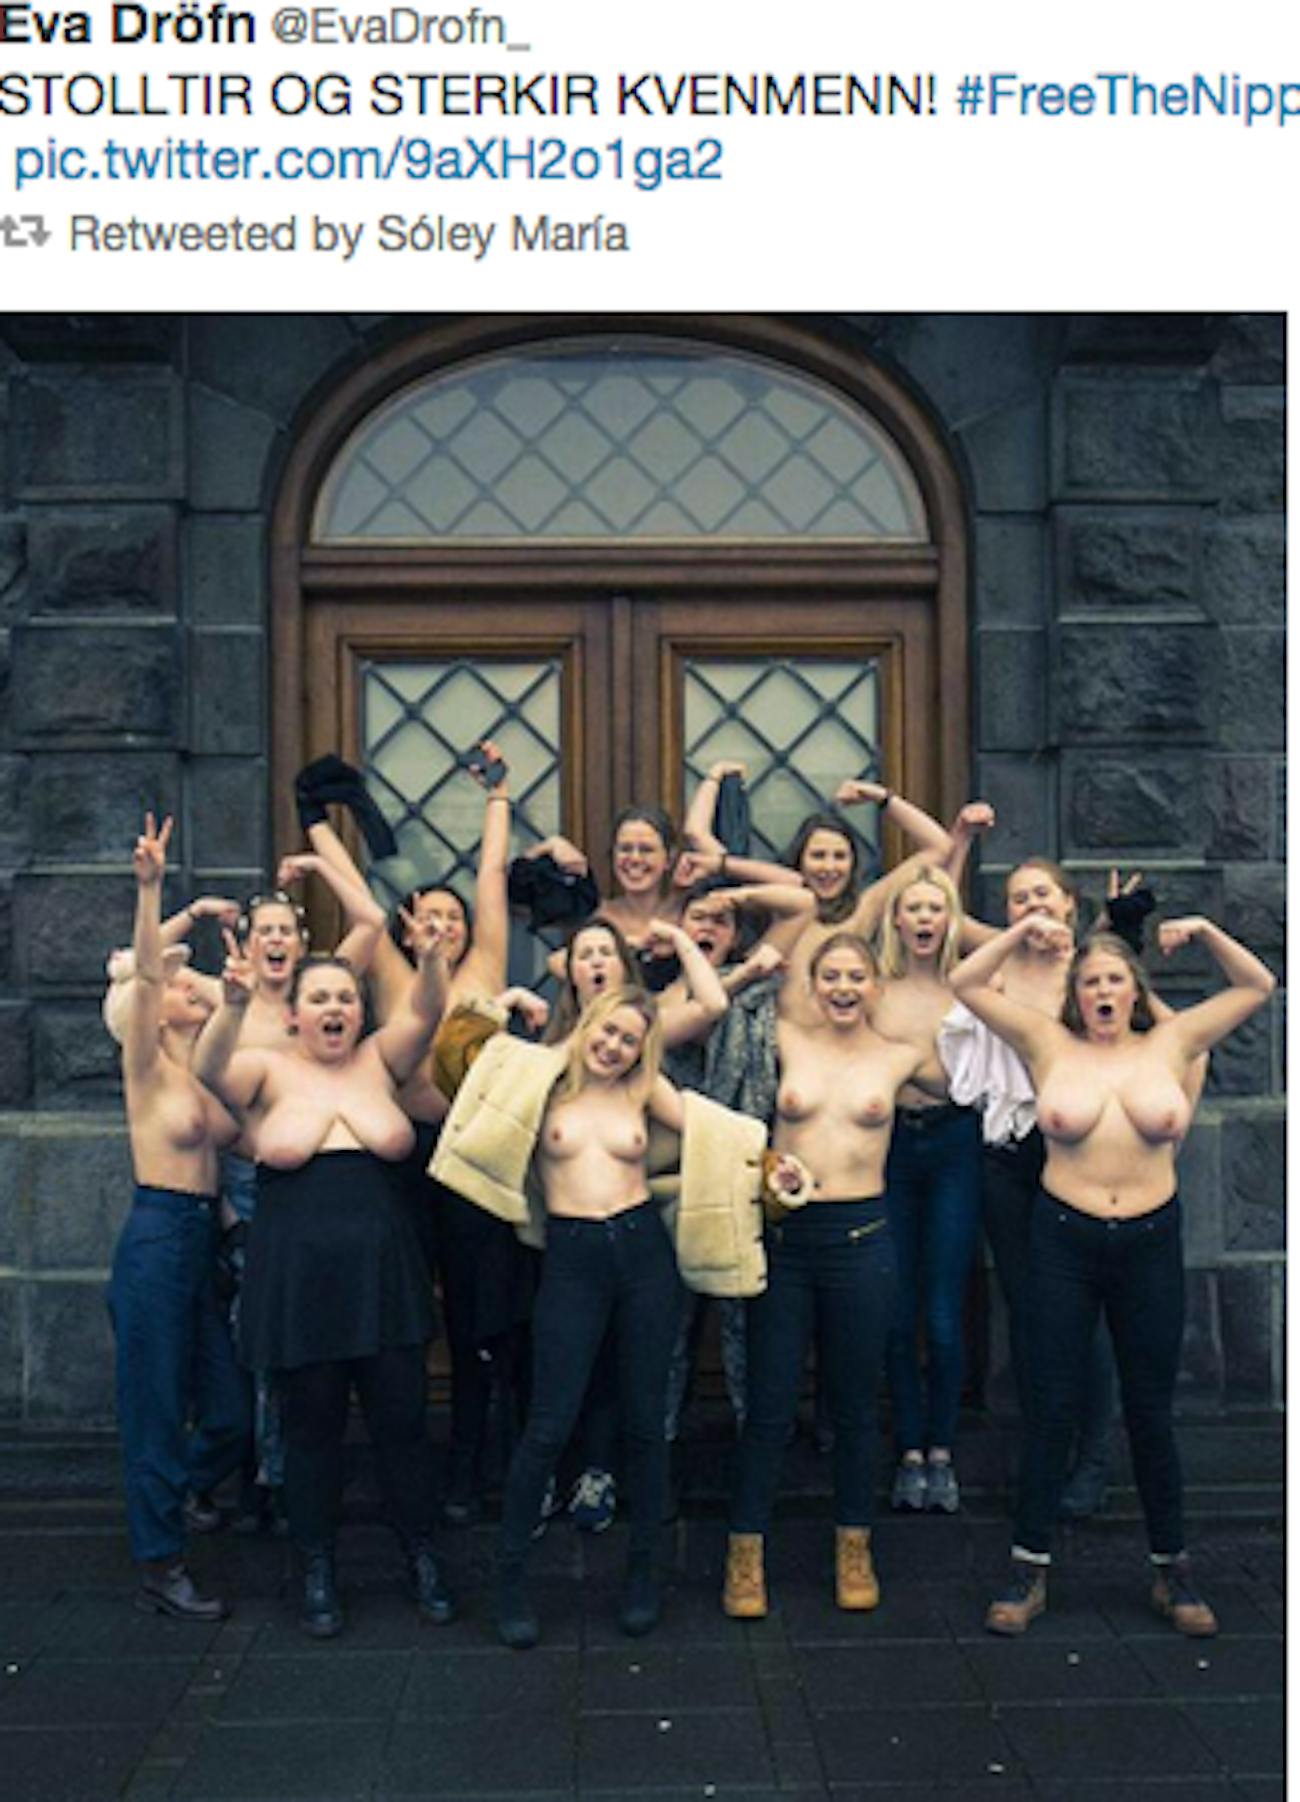 Free The Nipple - Free the nipple! | Guide to Iceland